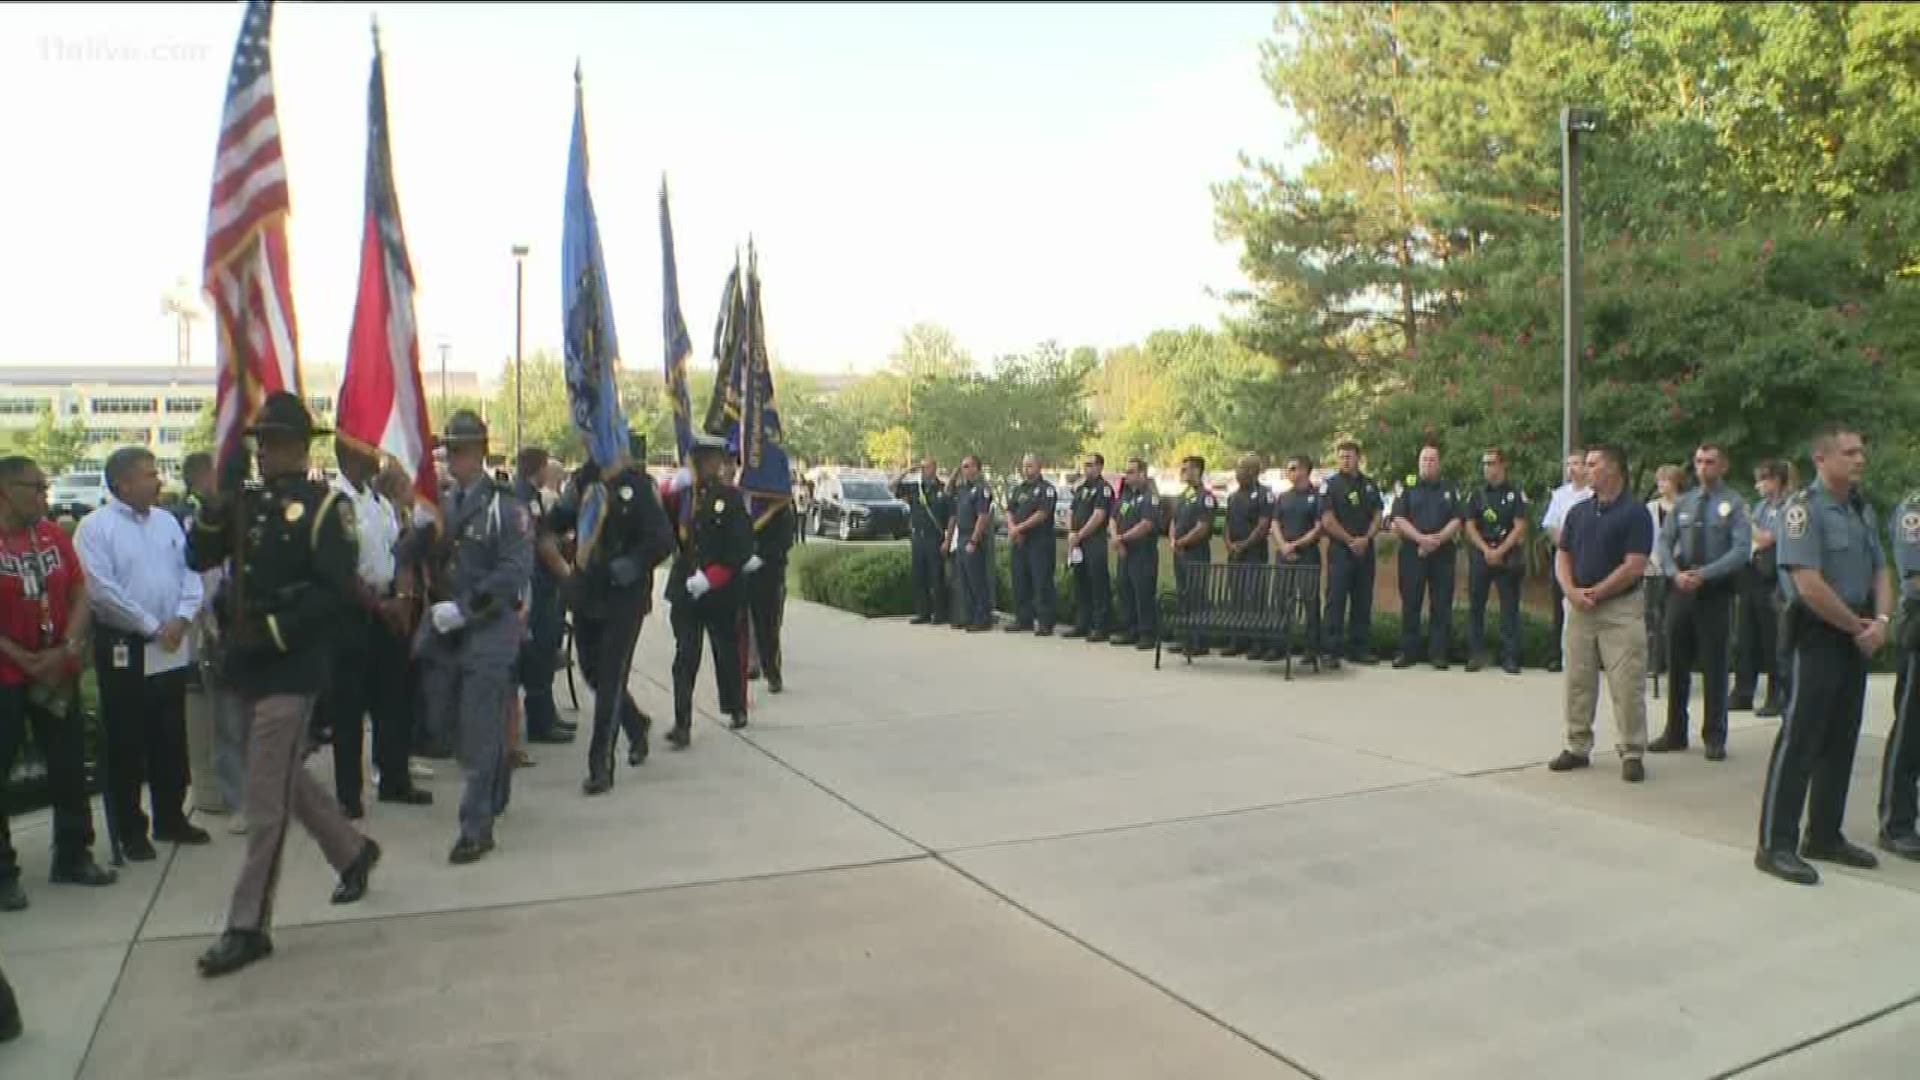 Events were held over metro Atlanta to honor those who died.